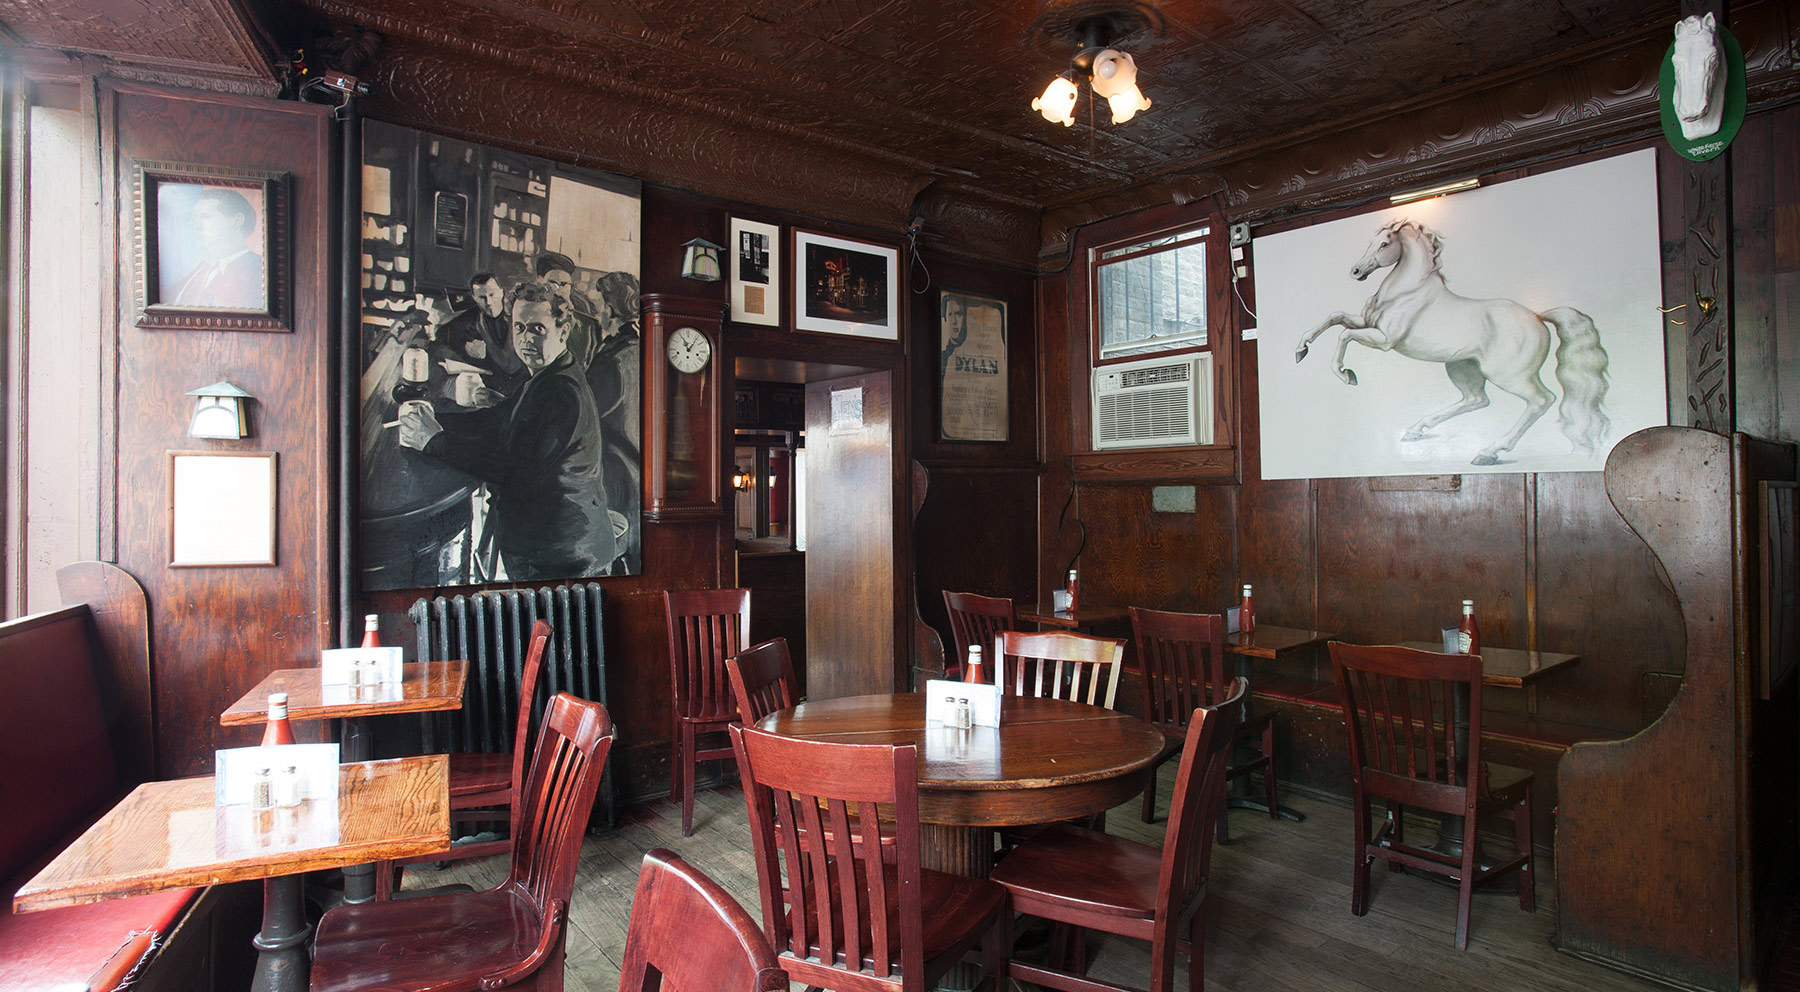 The White Horse Tavern is a legendary literary gathering place